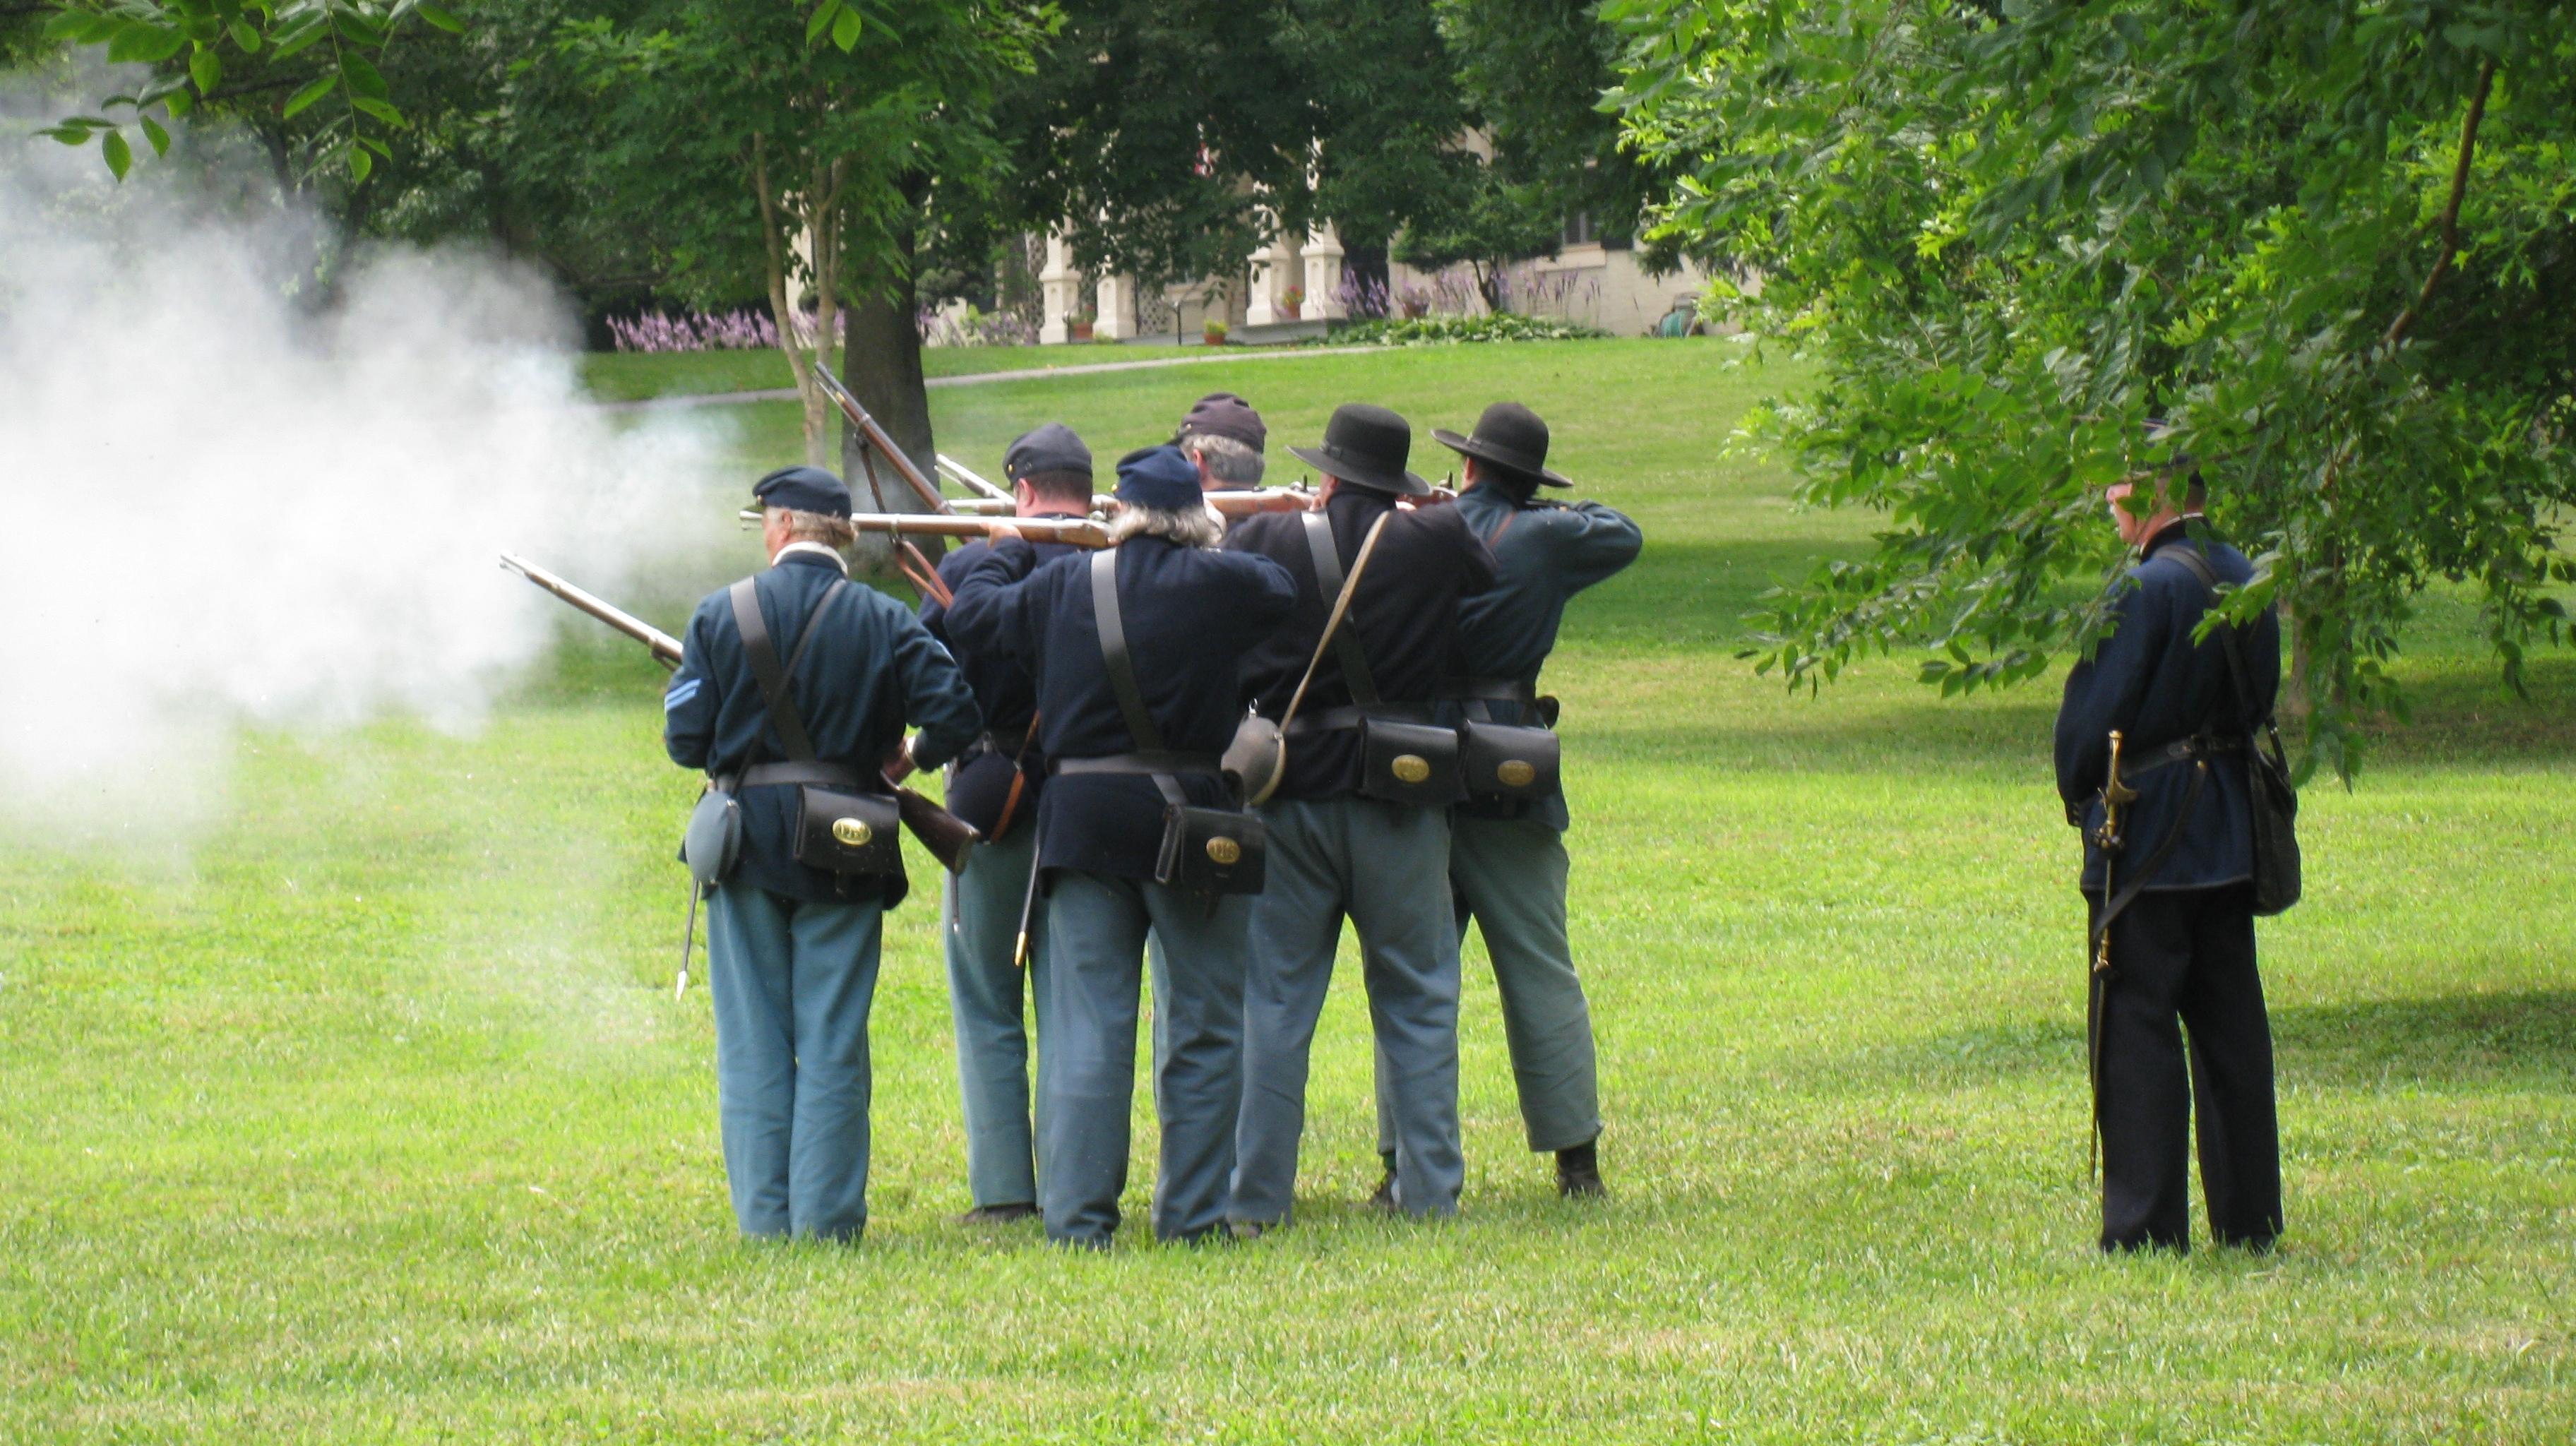 Living history demonstrators dressed as Union soldiers fire small arms.